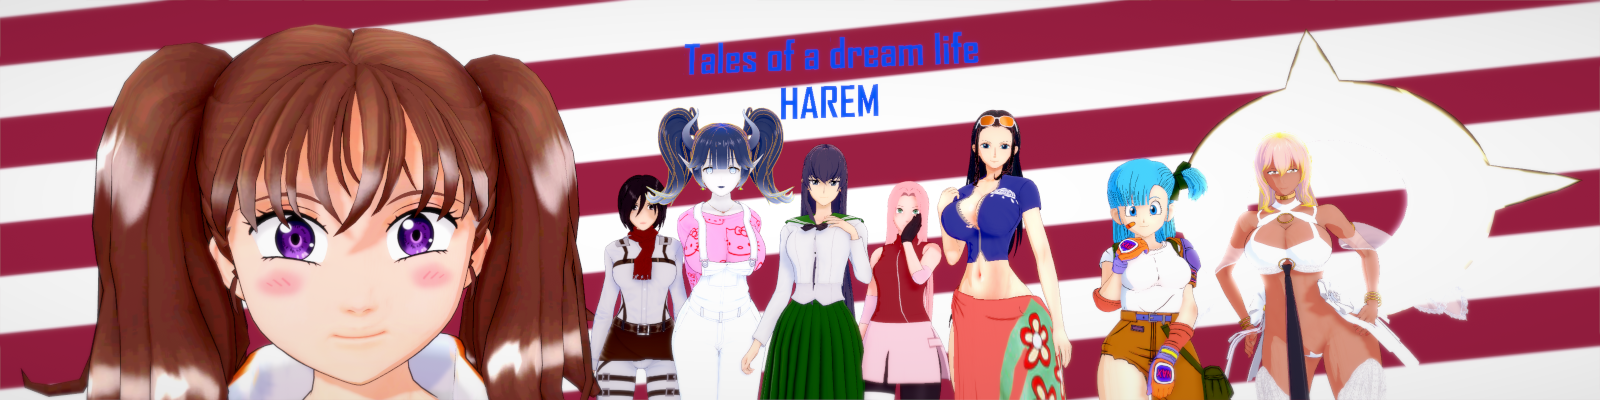 tales of a dream life Harem: Chapter one